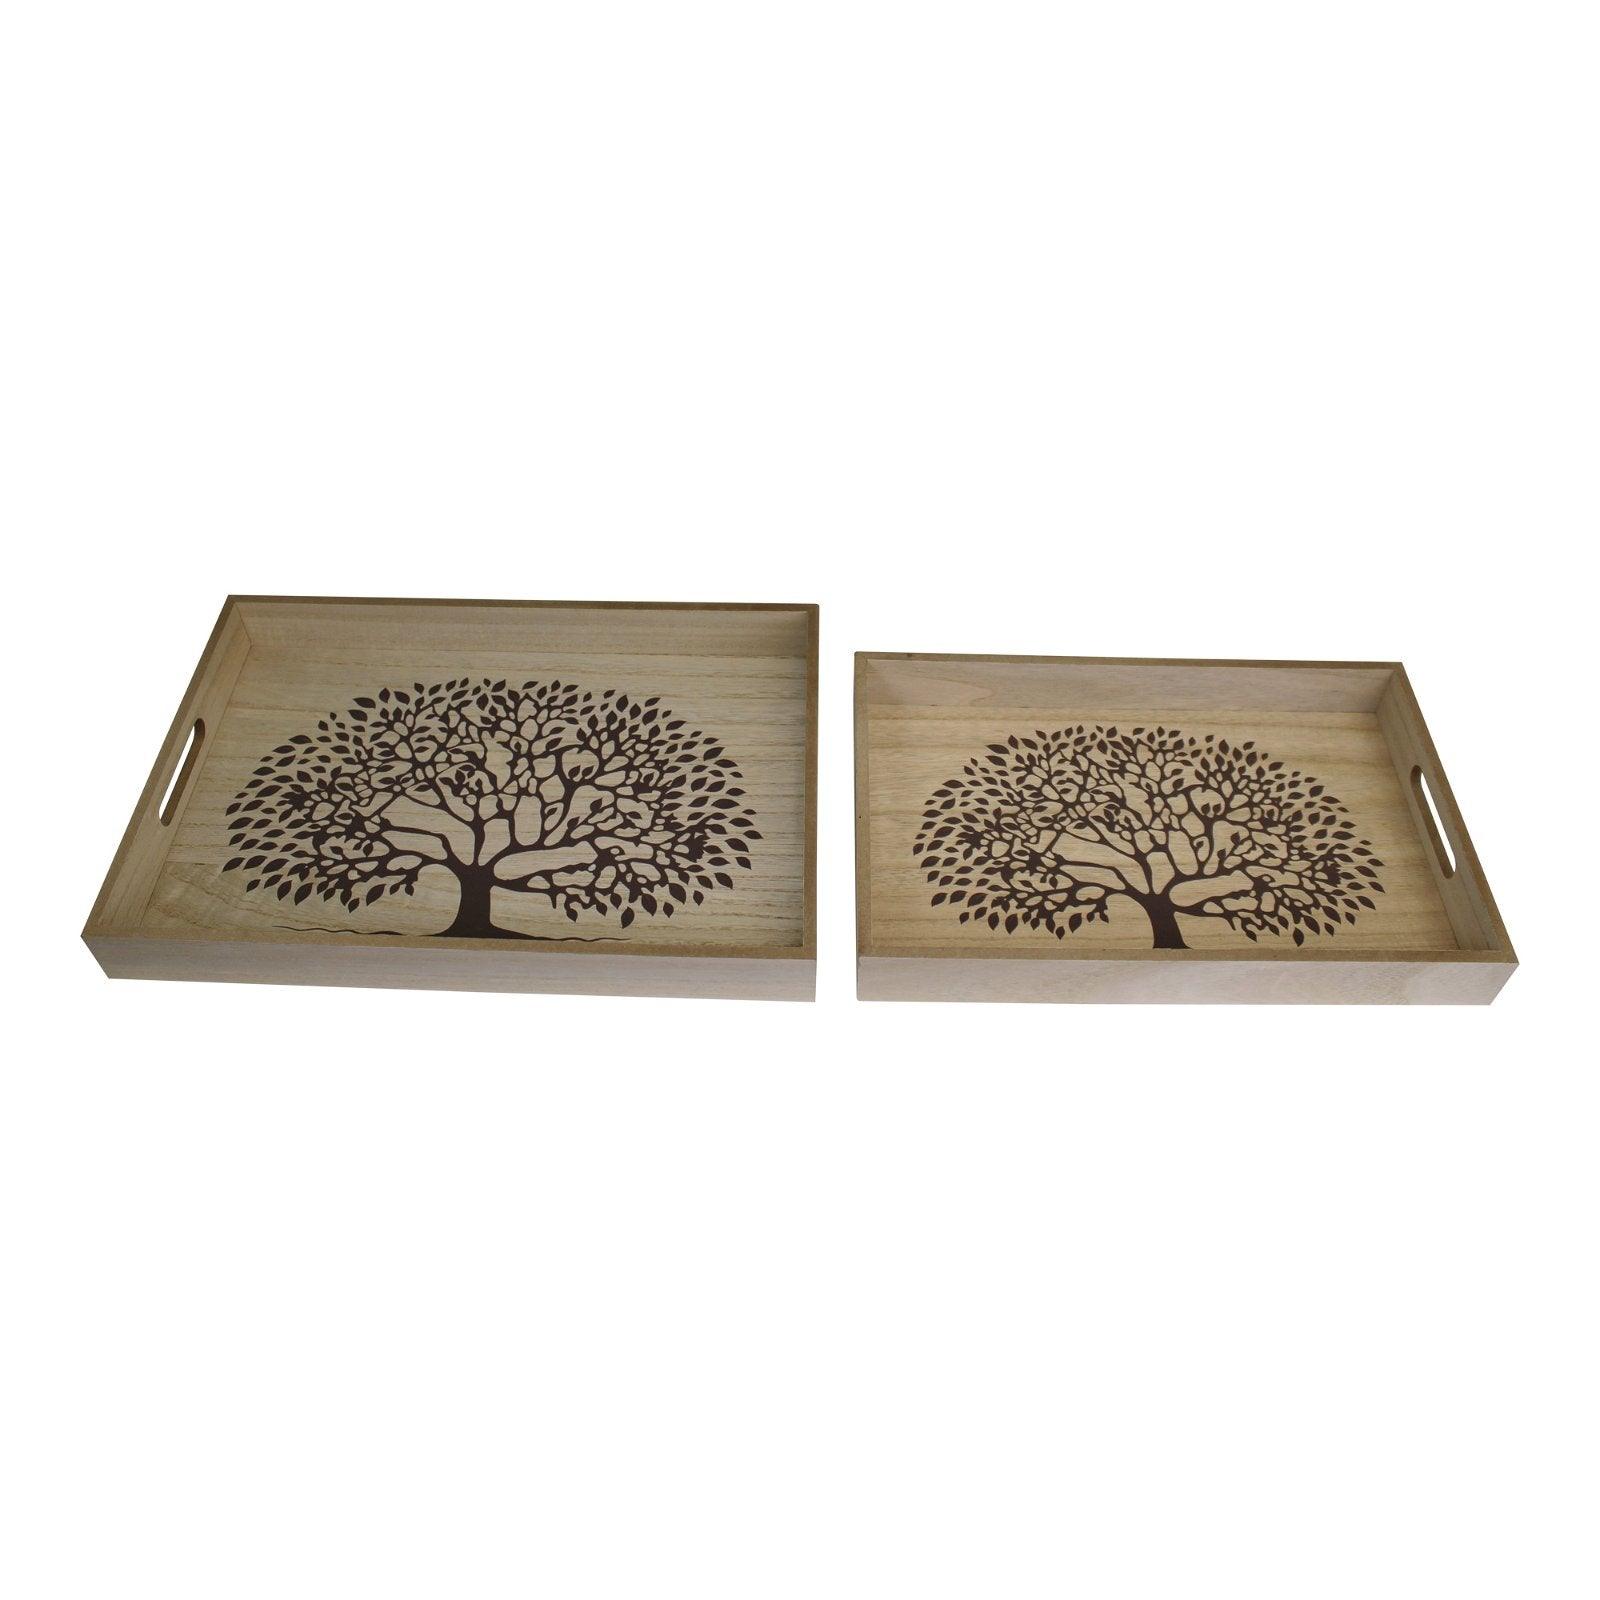 View Set Of 2 Tree Of Life Wooden Trays information